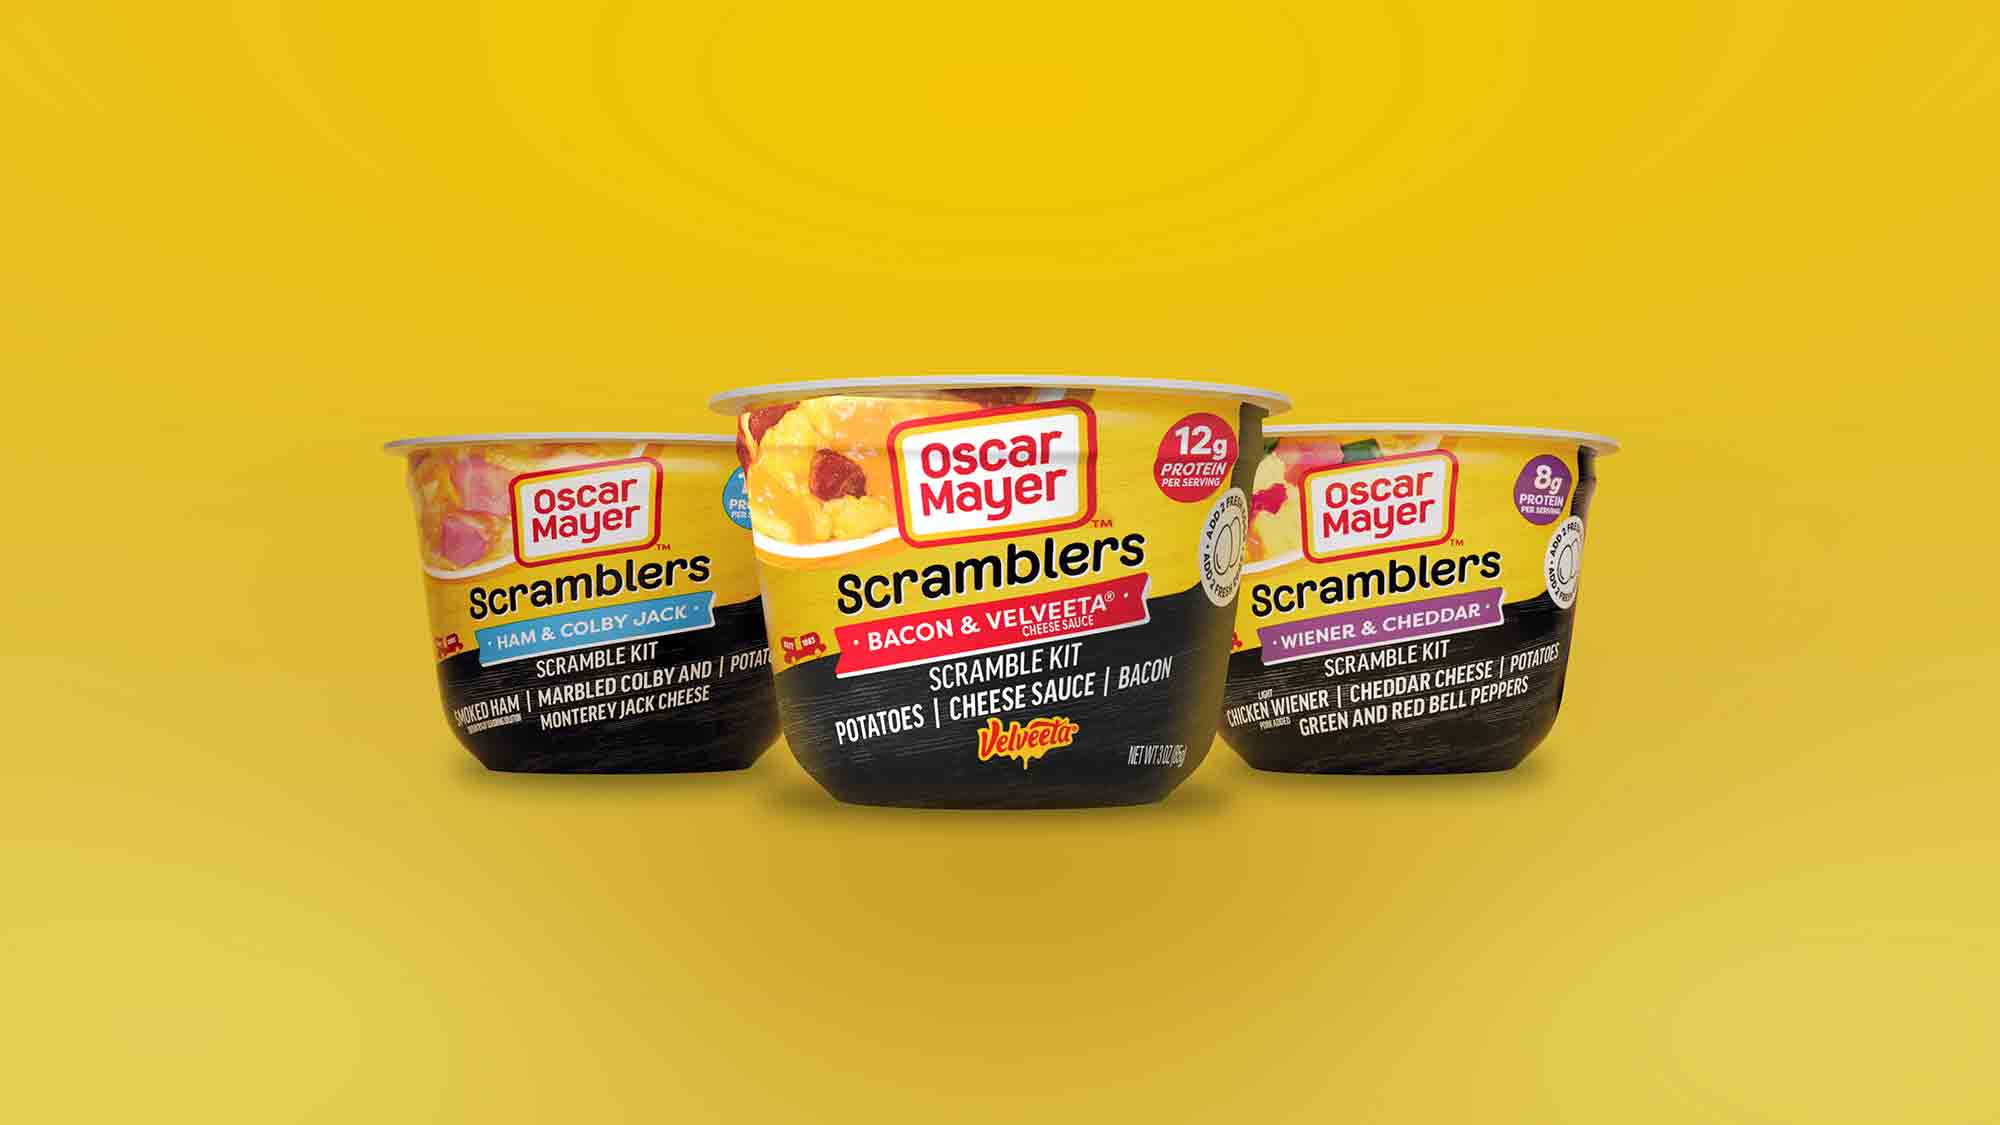 Oscar Mayer Enters On The Go Refrigerated Breakfast Category with New Scramblers Innovation